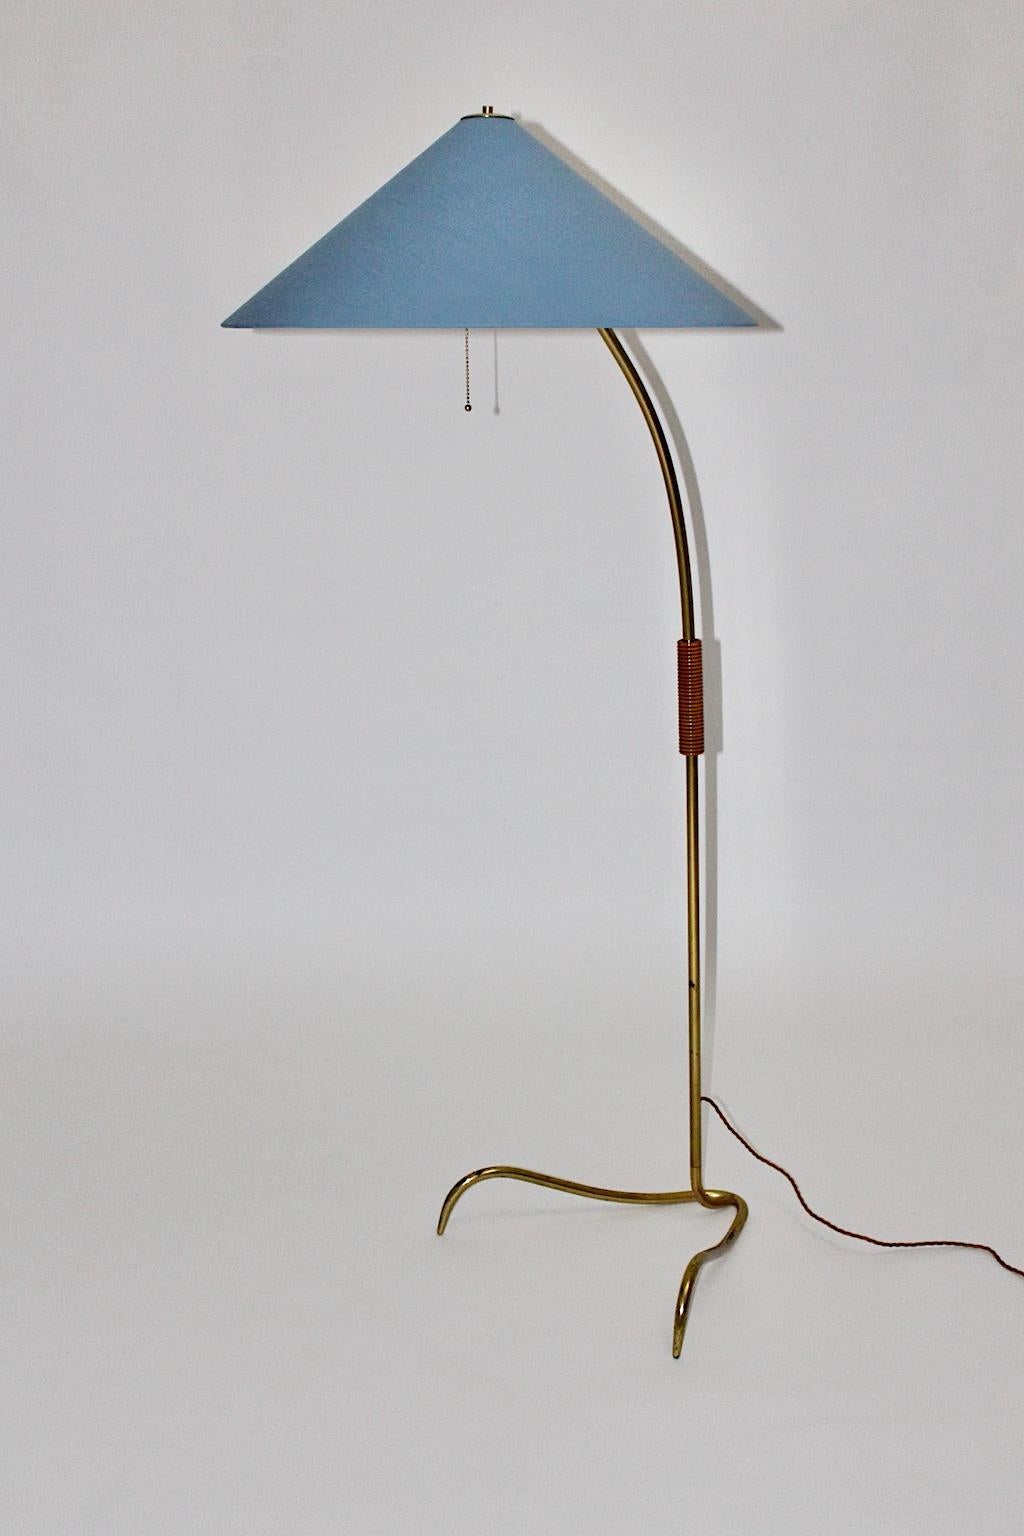 Rupert Nikoll Mid-Century Modern vintage brass clawfoot floor lamp designed and manufactured 1950s, Vienna.
The base with the characteristic clawfoot was made of brass with a fluted beechwood handle and shows beautiful patina, while the renewed